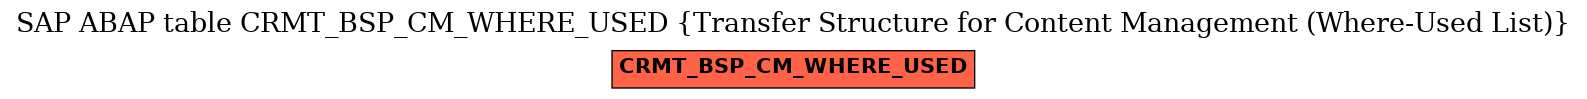 E-R Diagram for table CRMT_BSP_CM_WHERE_USED (Transfer Structure for Content Management (Where-Used List))